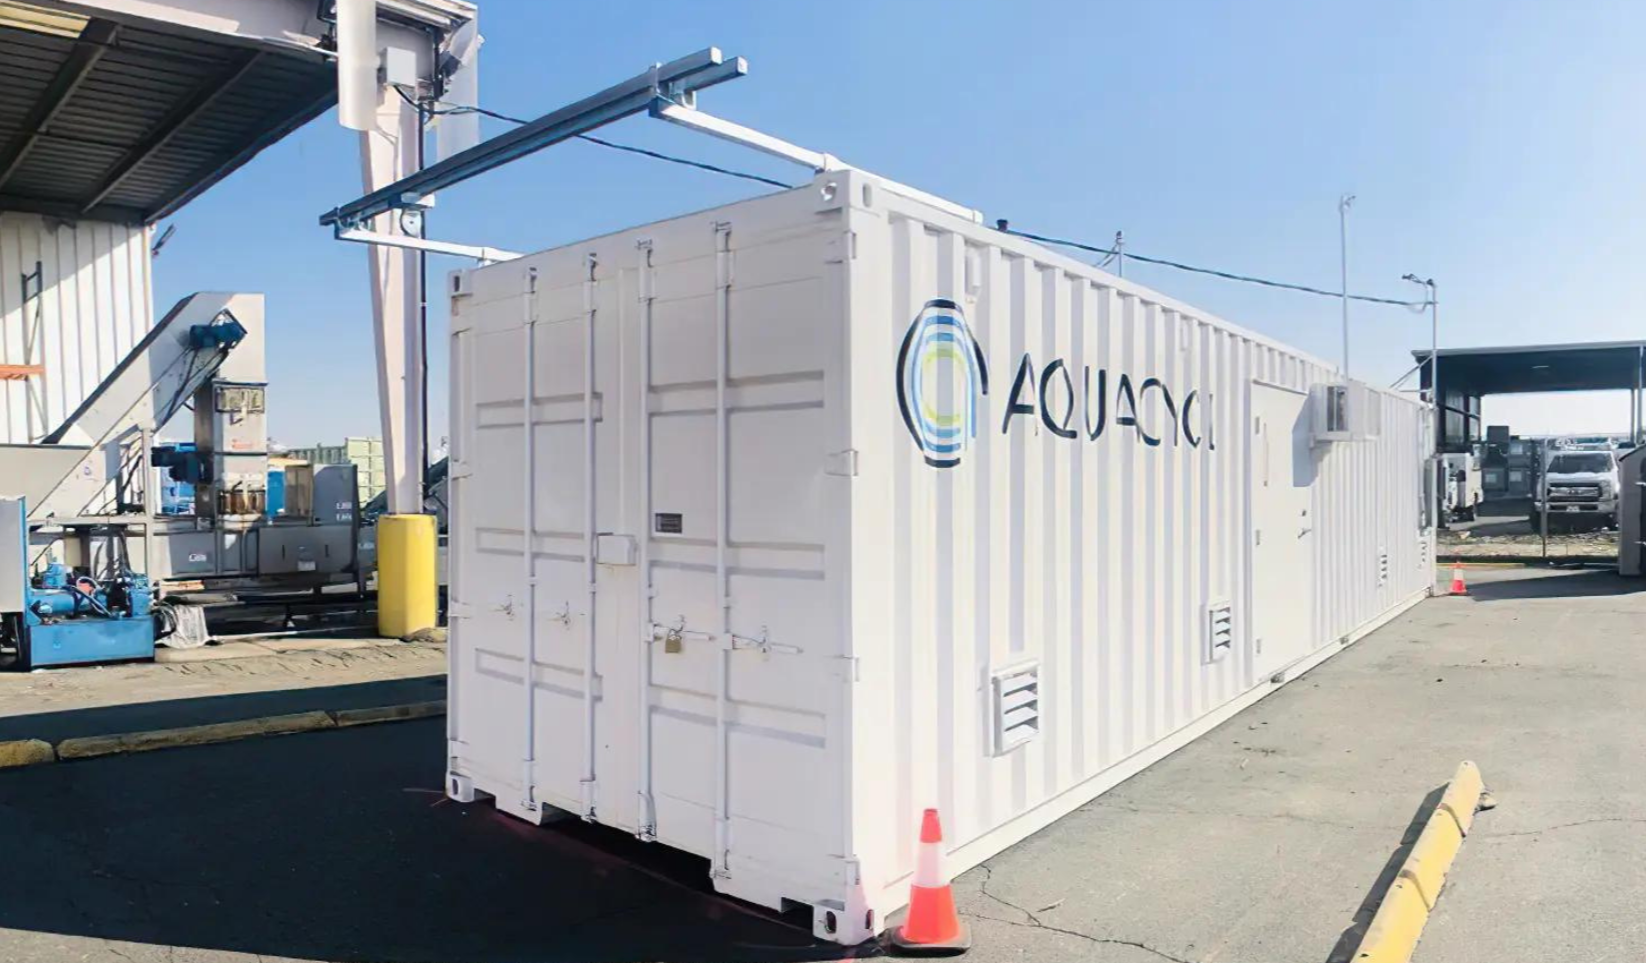 Aquacycl Shipping Container 1813x1020-1-1